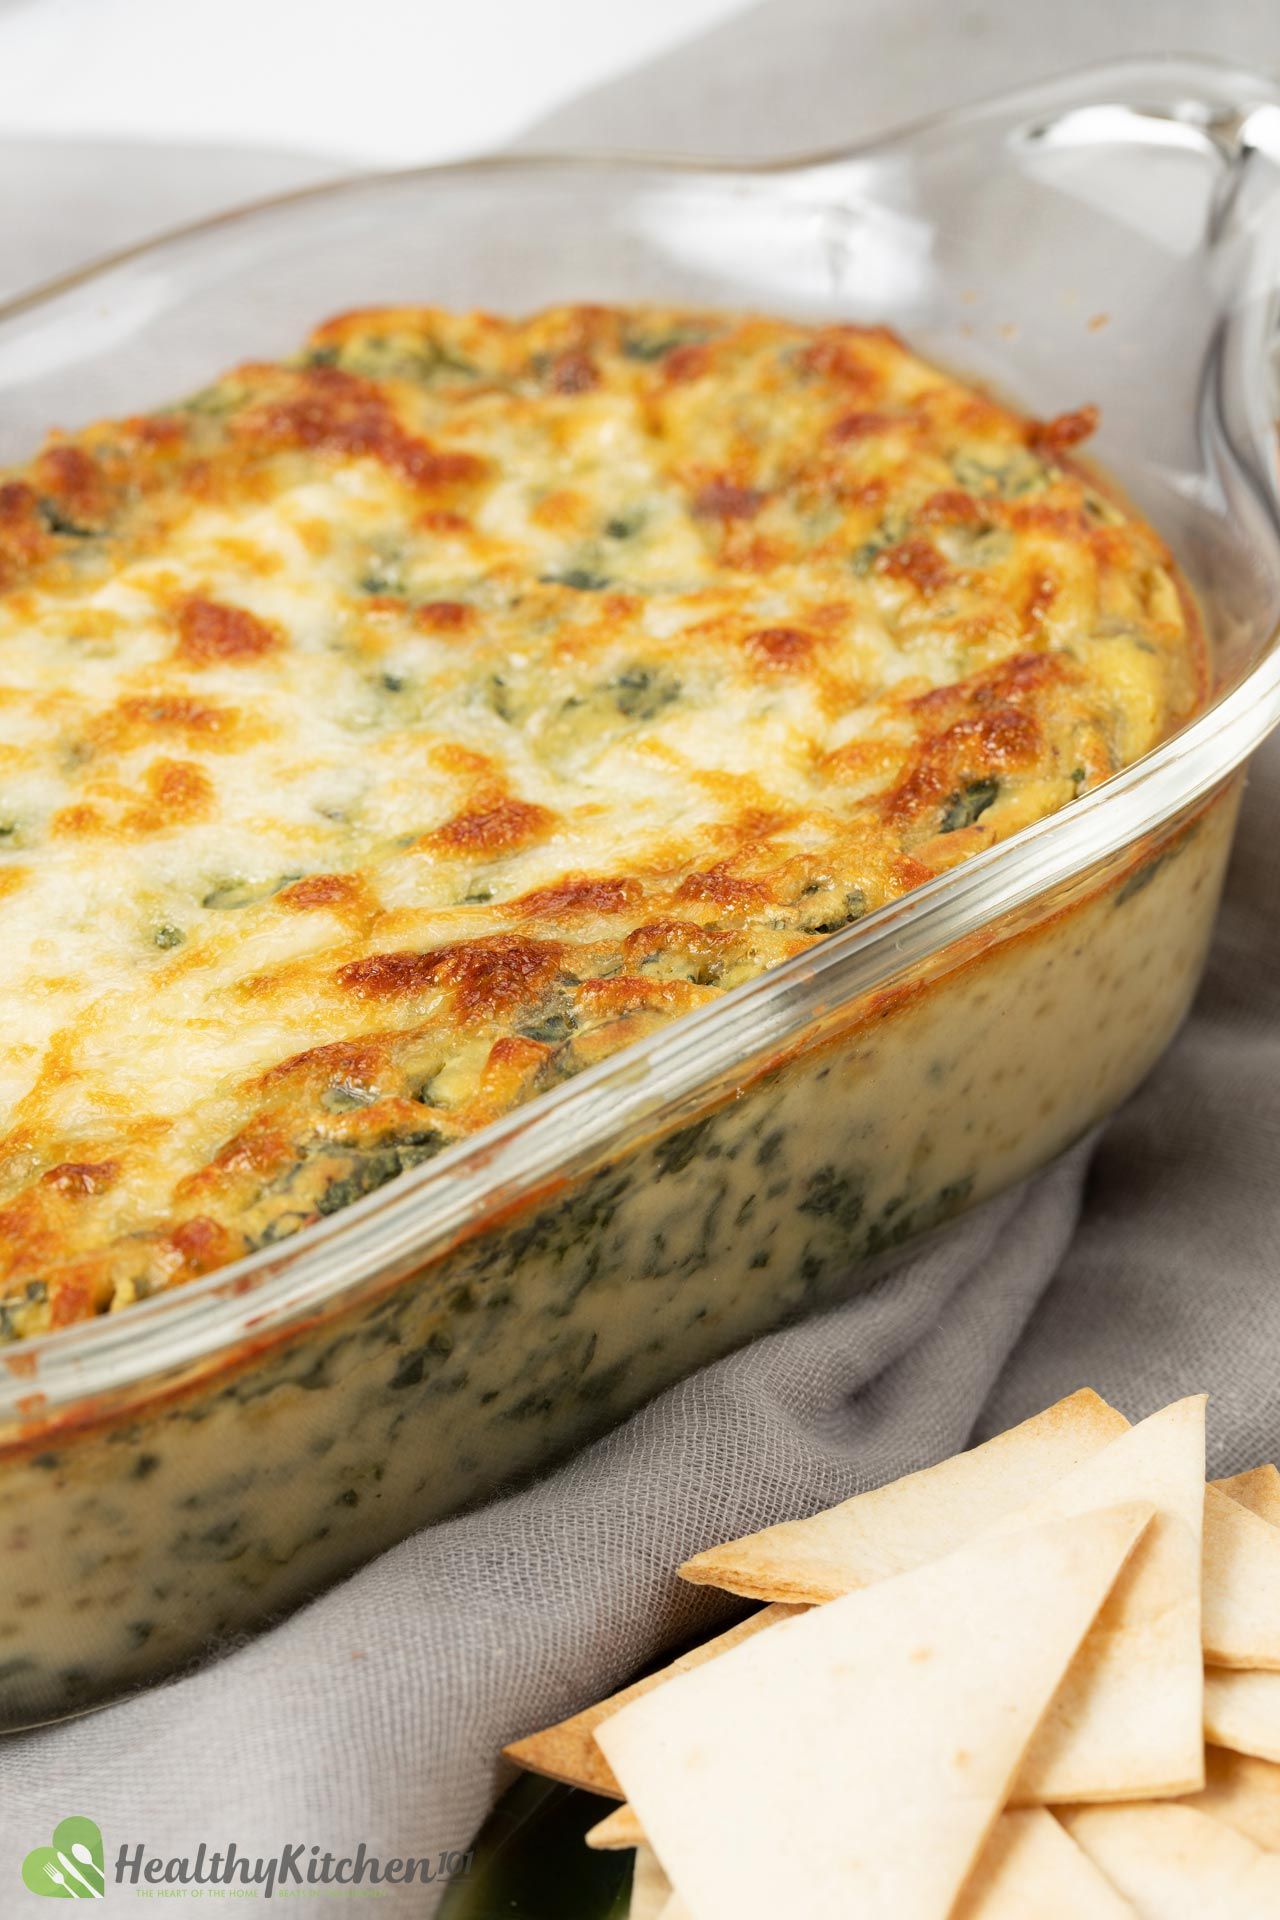 What goes well with Spinach Artichoke Dip Recipe